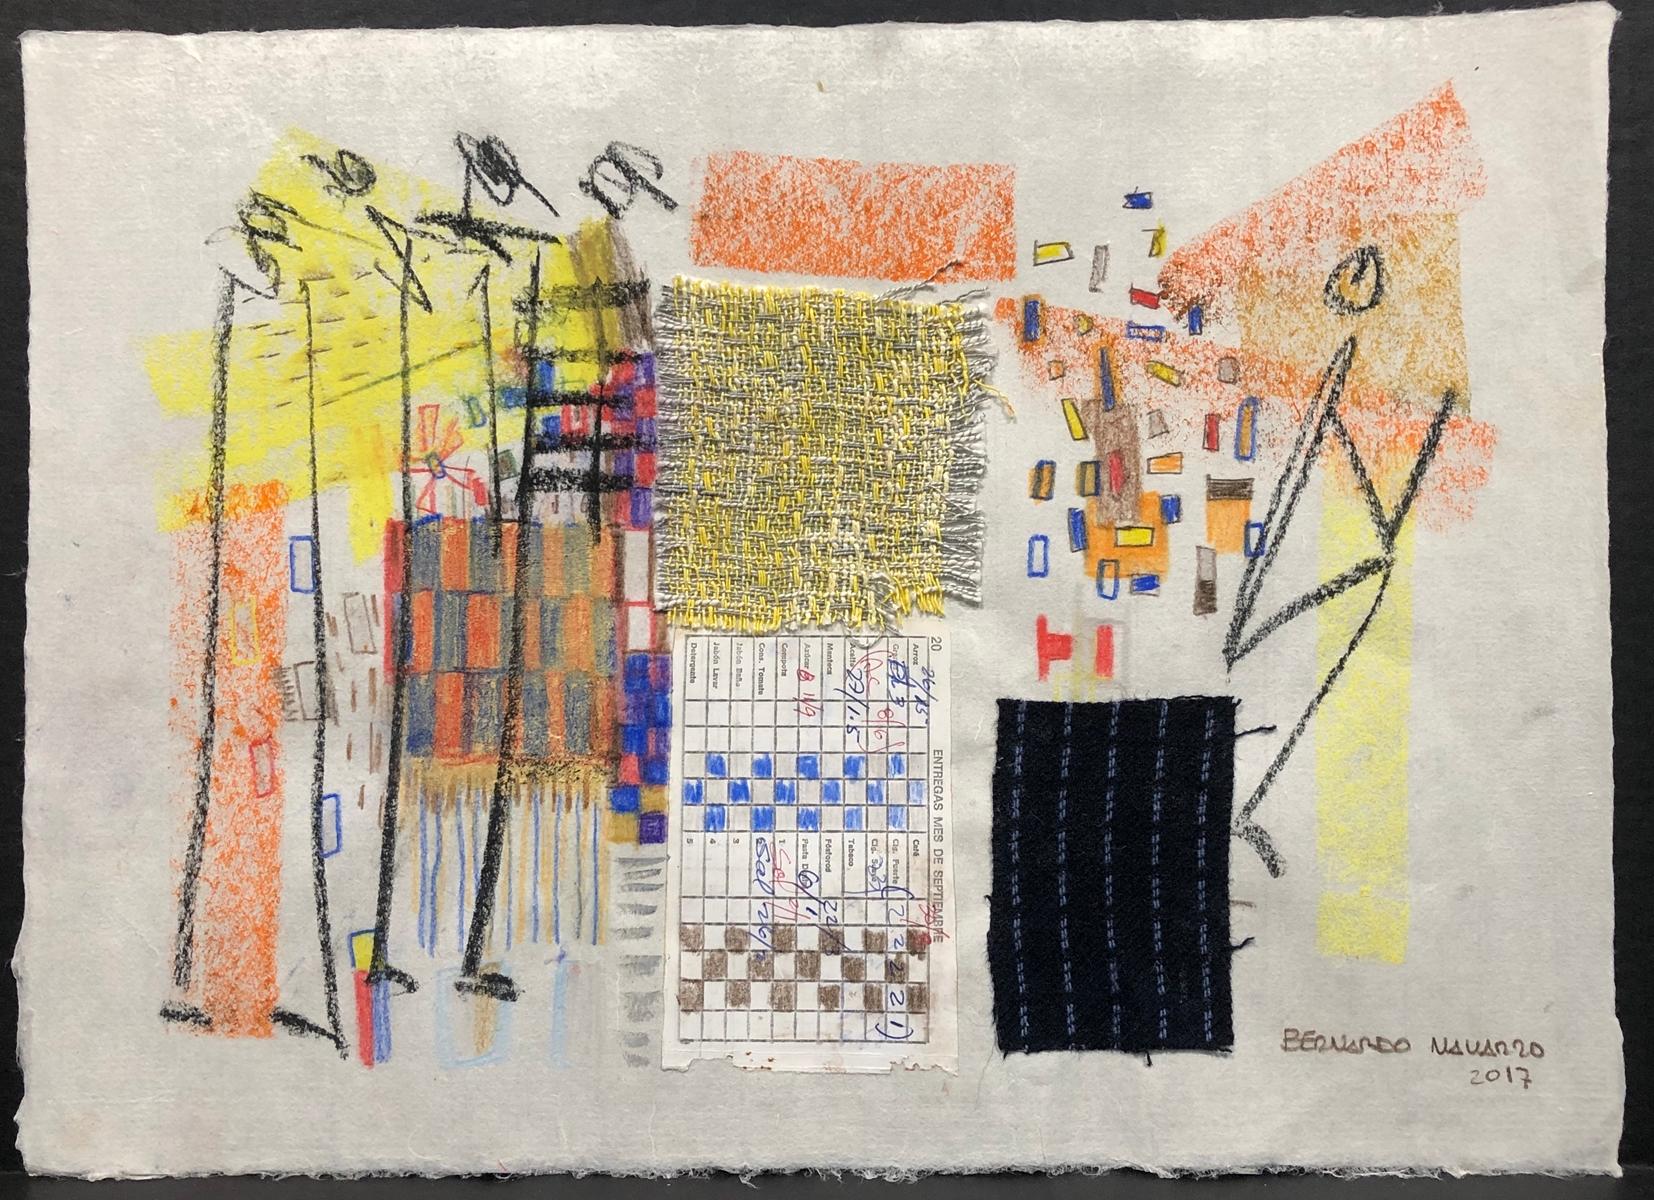 Bernardo Navarro Tomas (Cuba, 1977)
'Untitled', 2017
mixed media on japanese paper
12.3 x 17 in. (31 x 43 cm.)
ID: NAA-304
Hand-signed by author